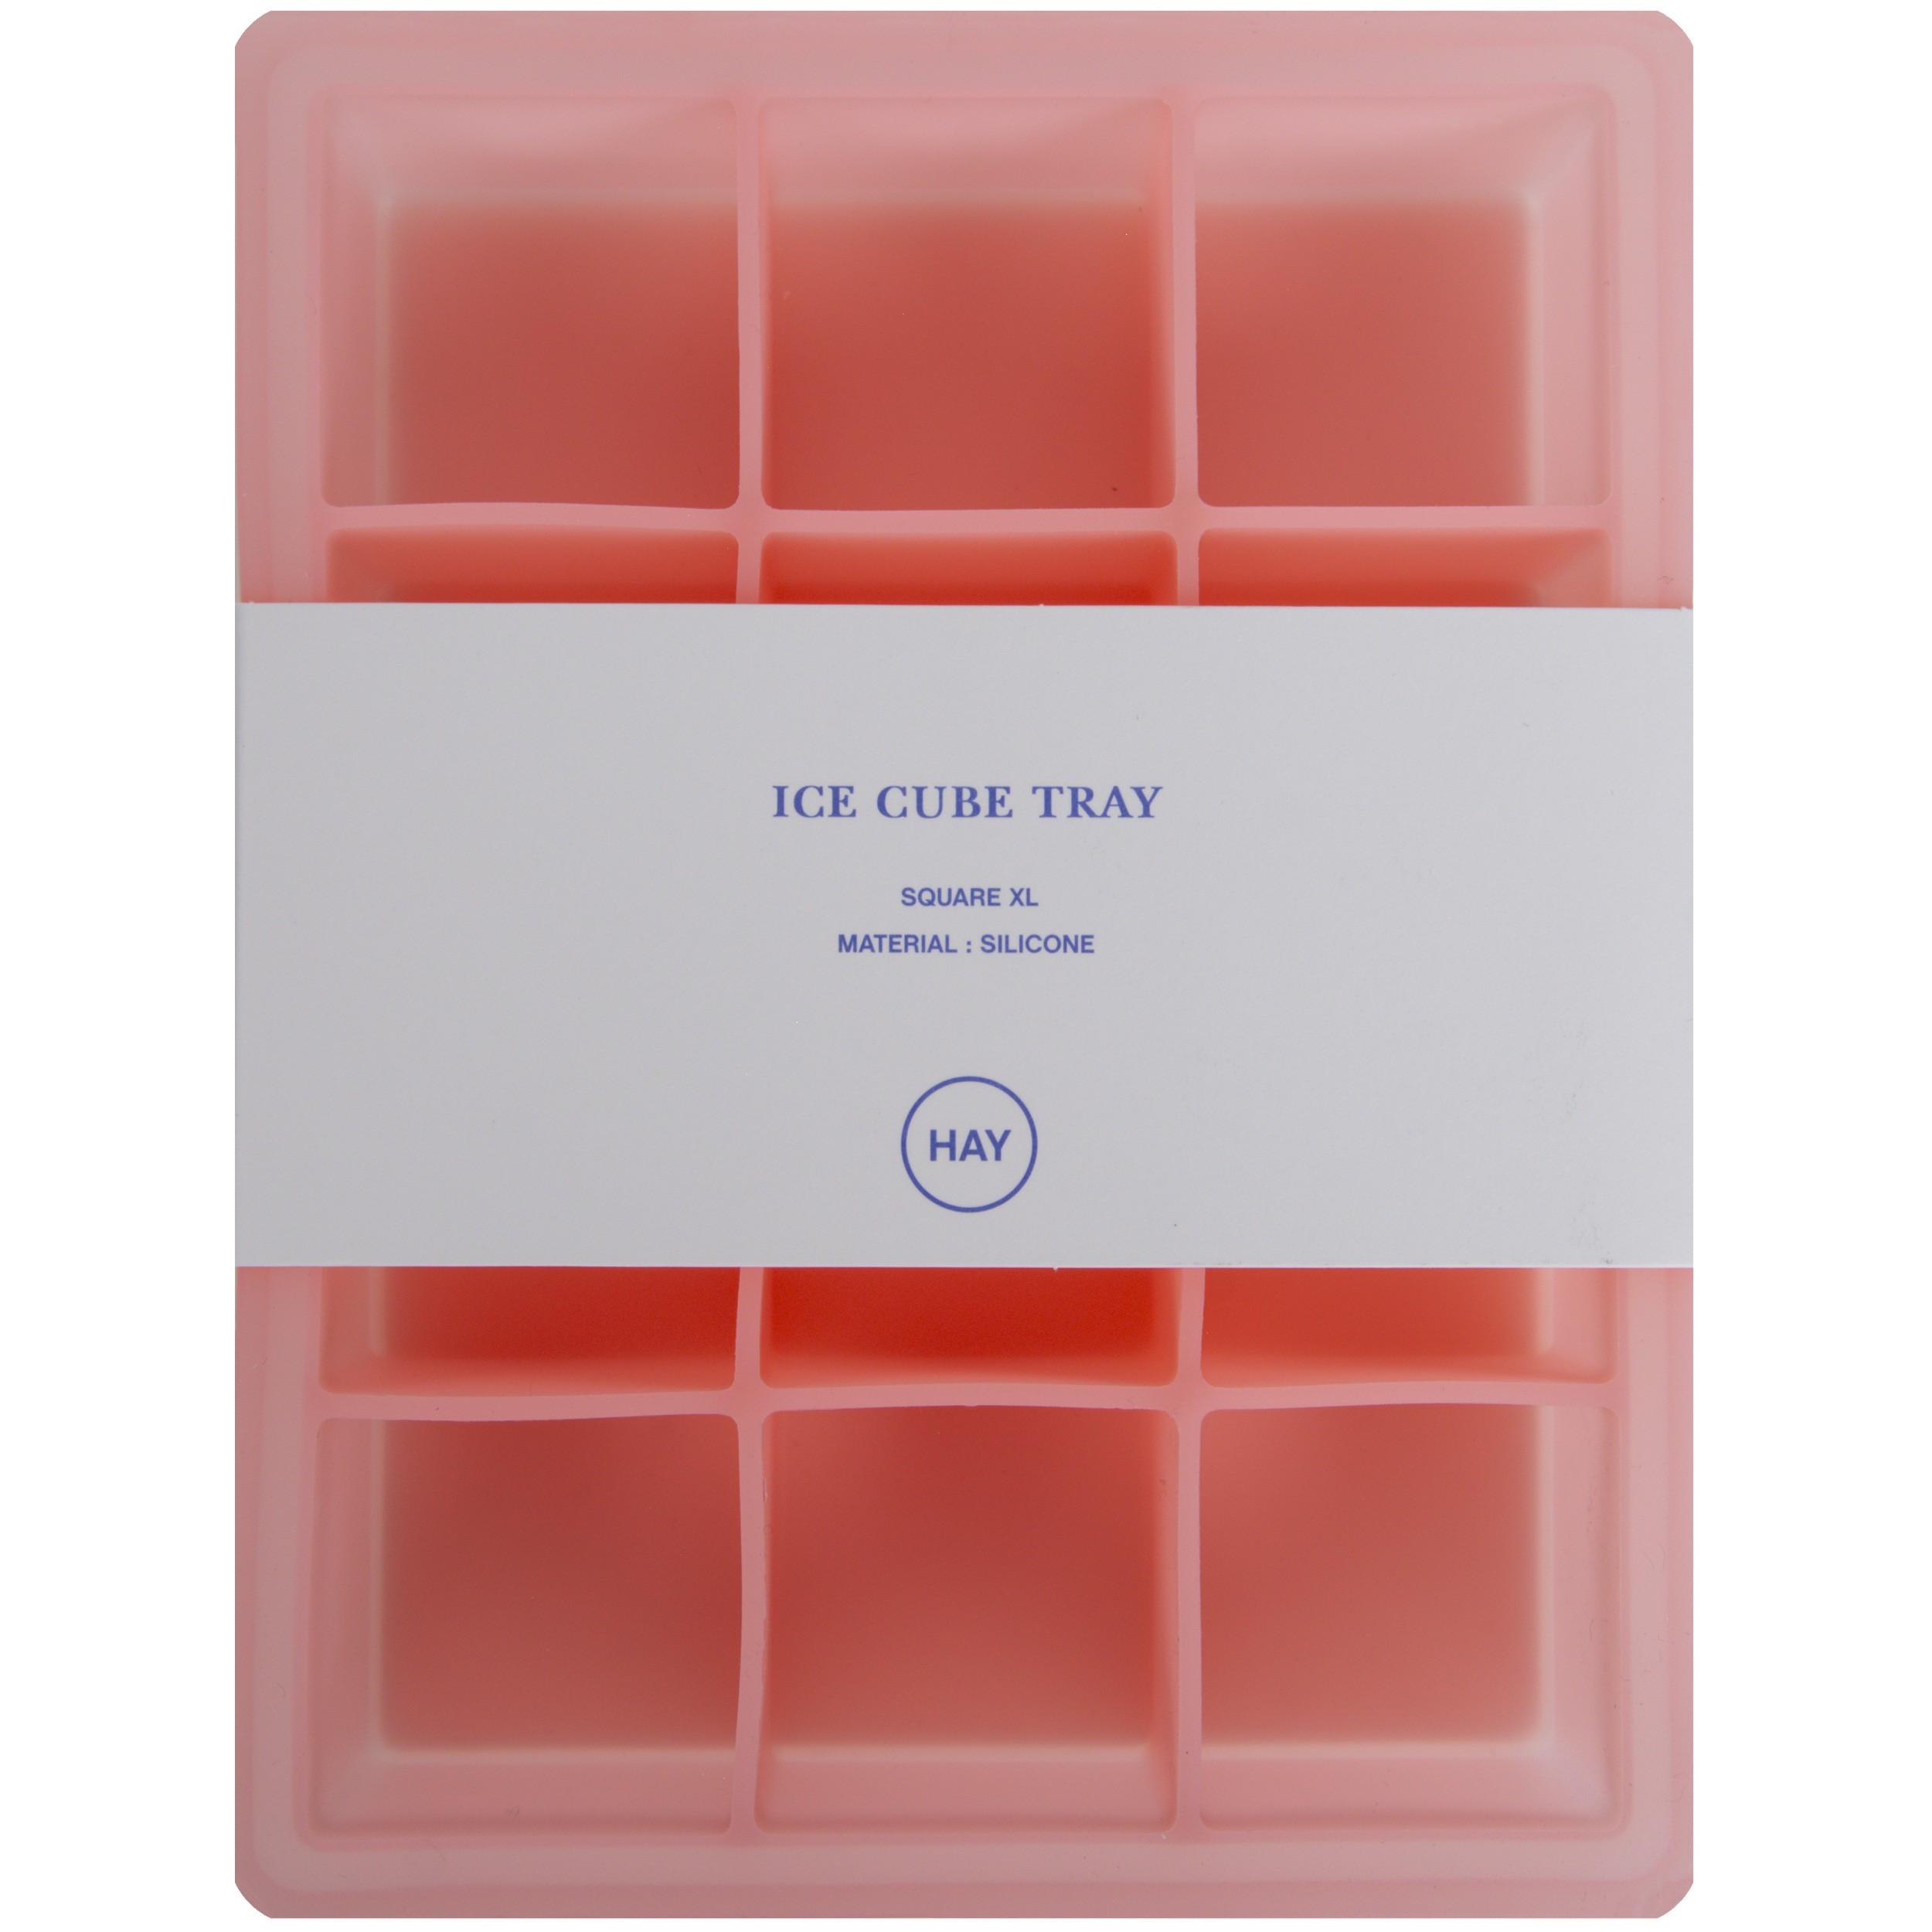 https://www.pockets.co.uk/media/catalog/product/cache/afca9a4301a4f957e27126911791b579/h/a/hay_aw21_lifestyle_icetray_pink_1.jpg